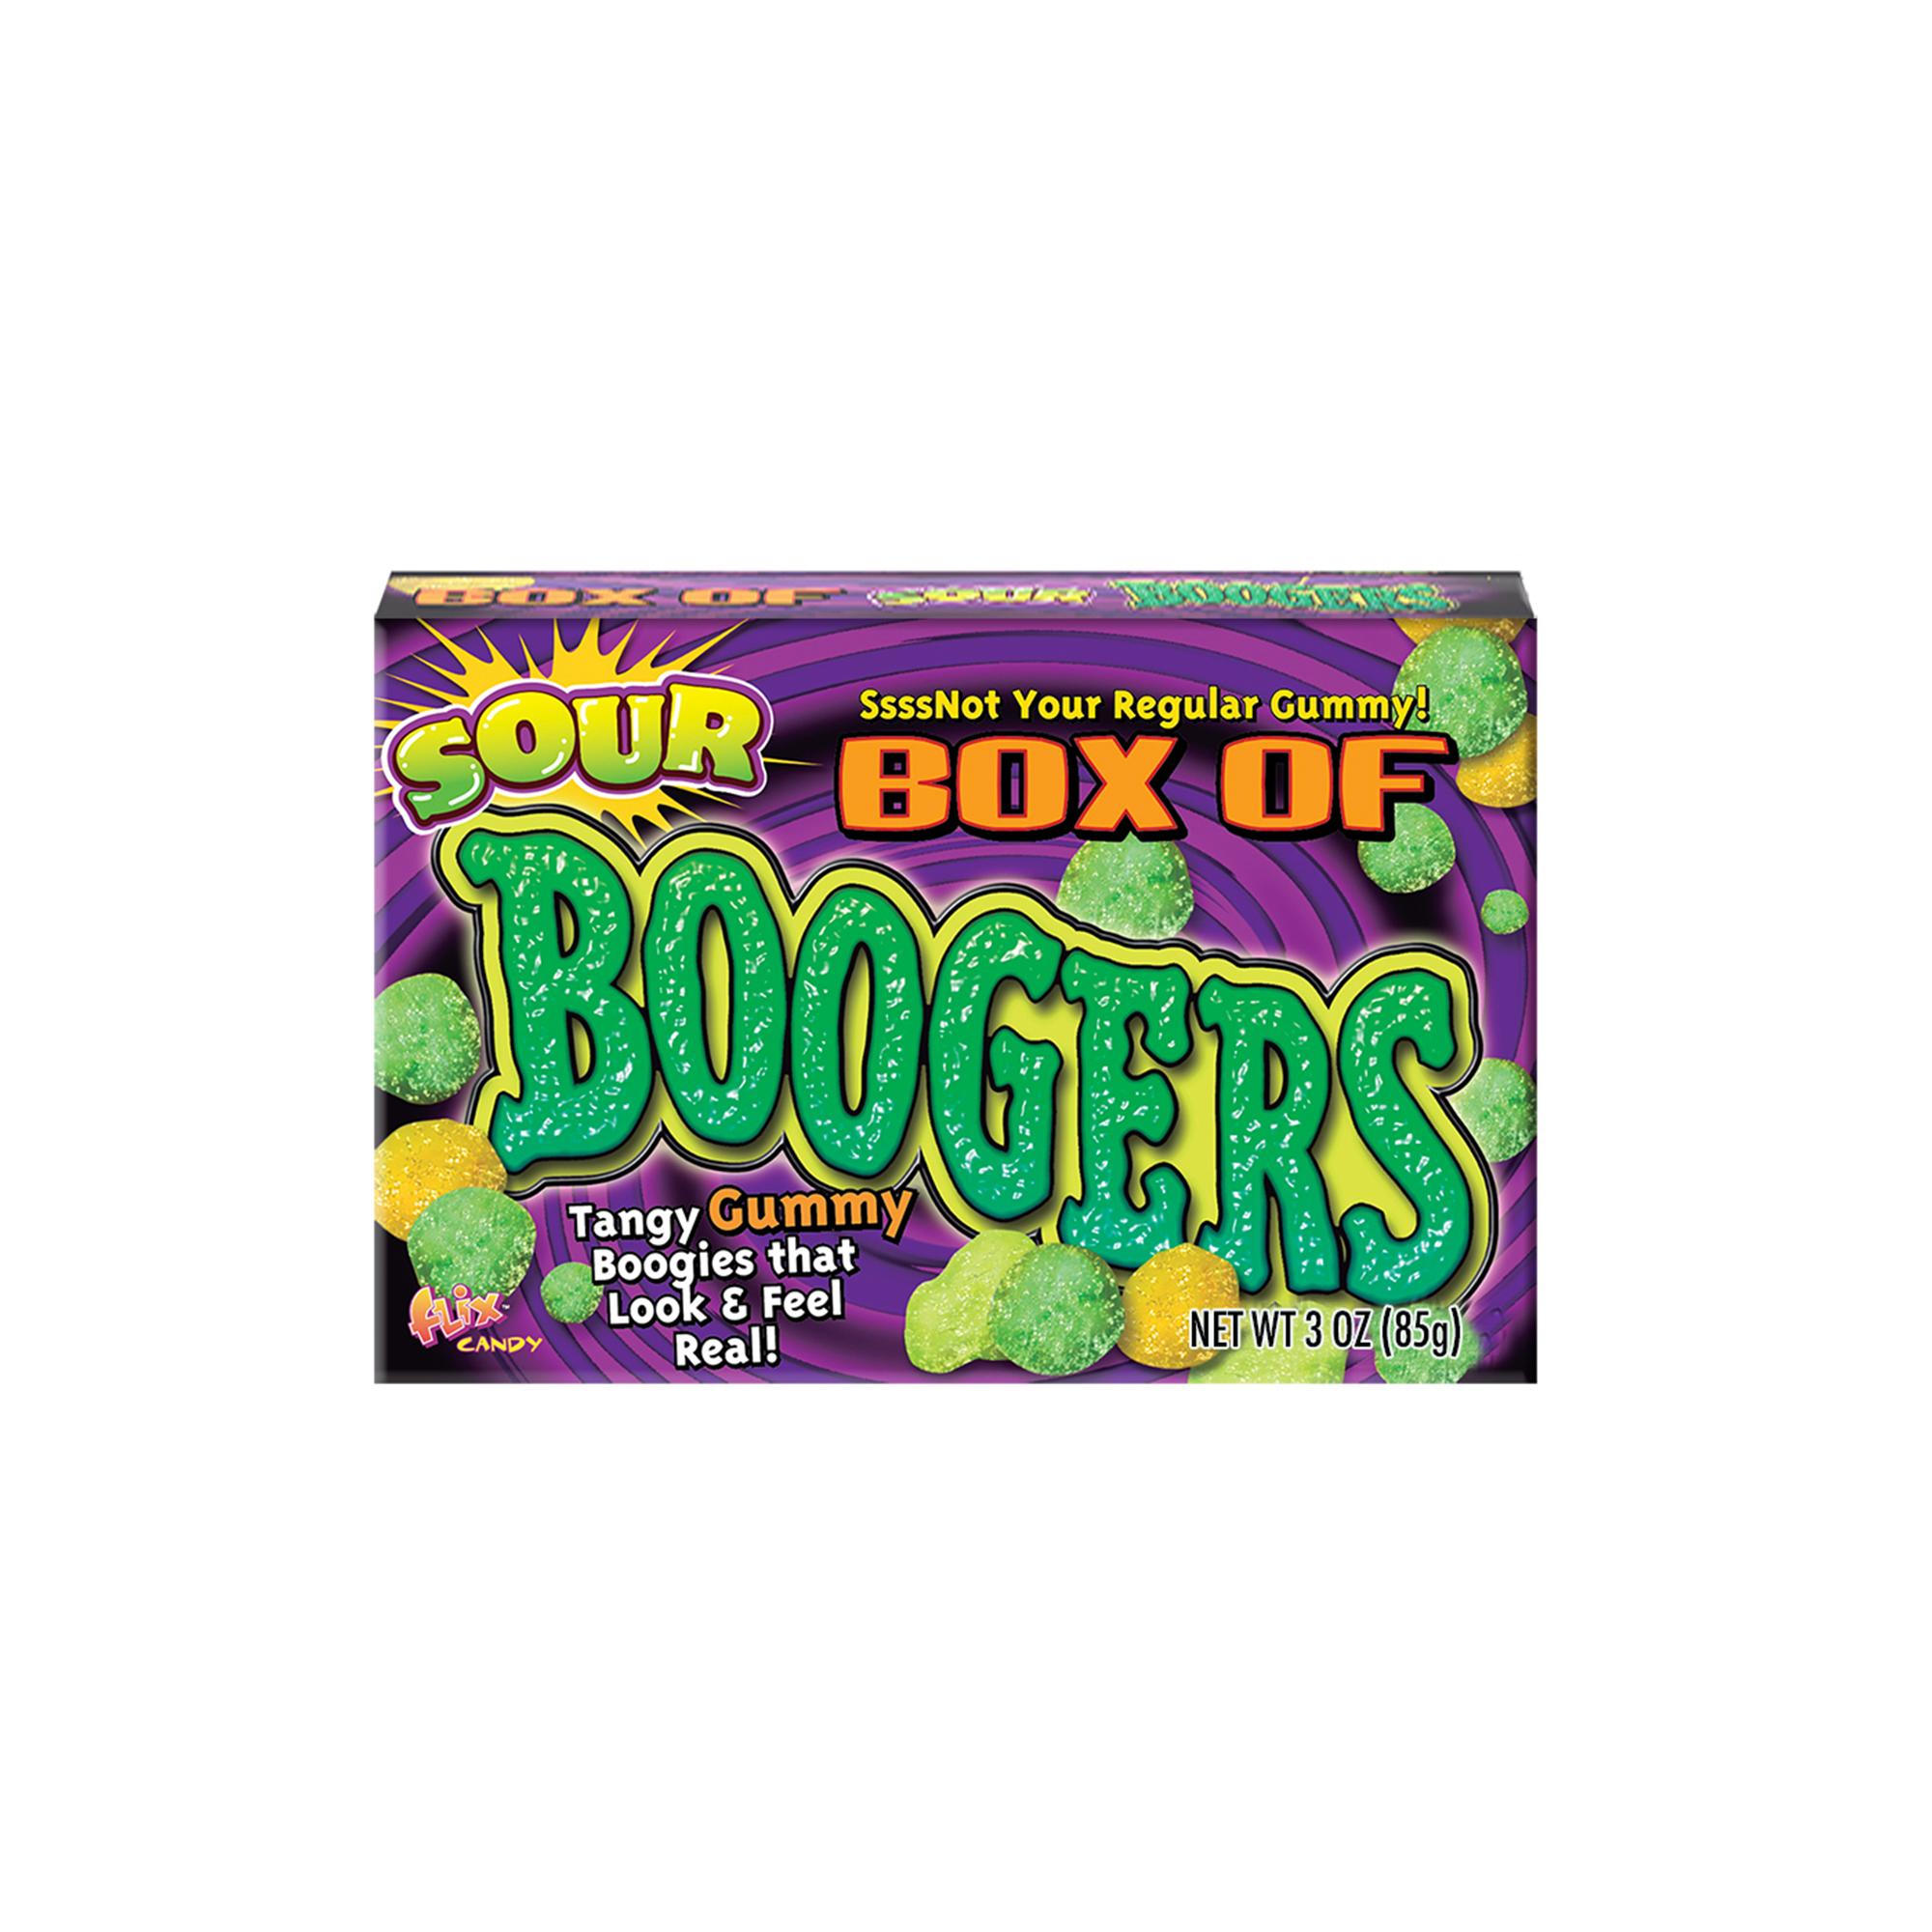 sour-box-of-boogers-3oz